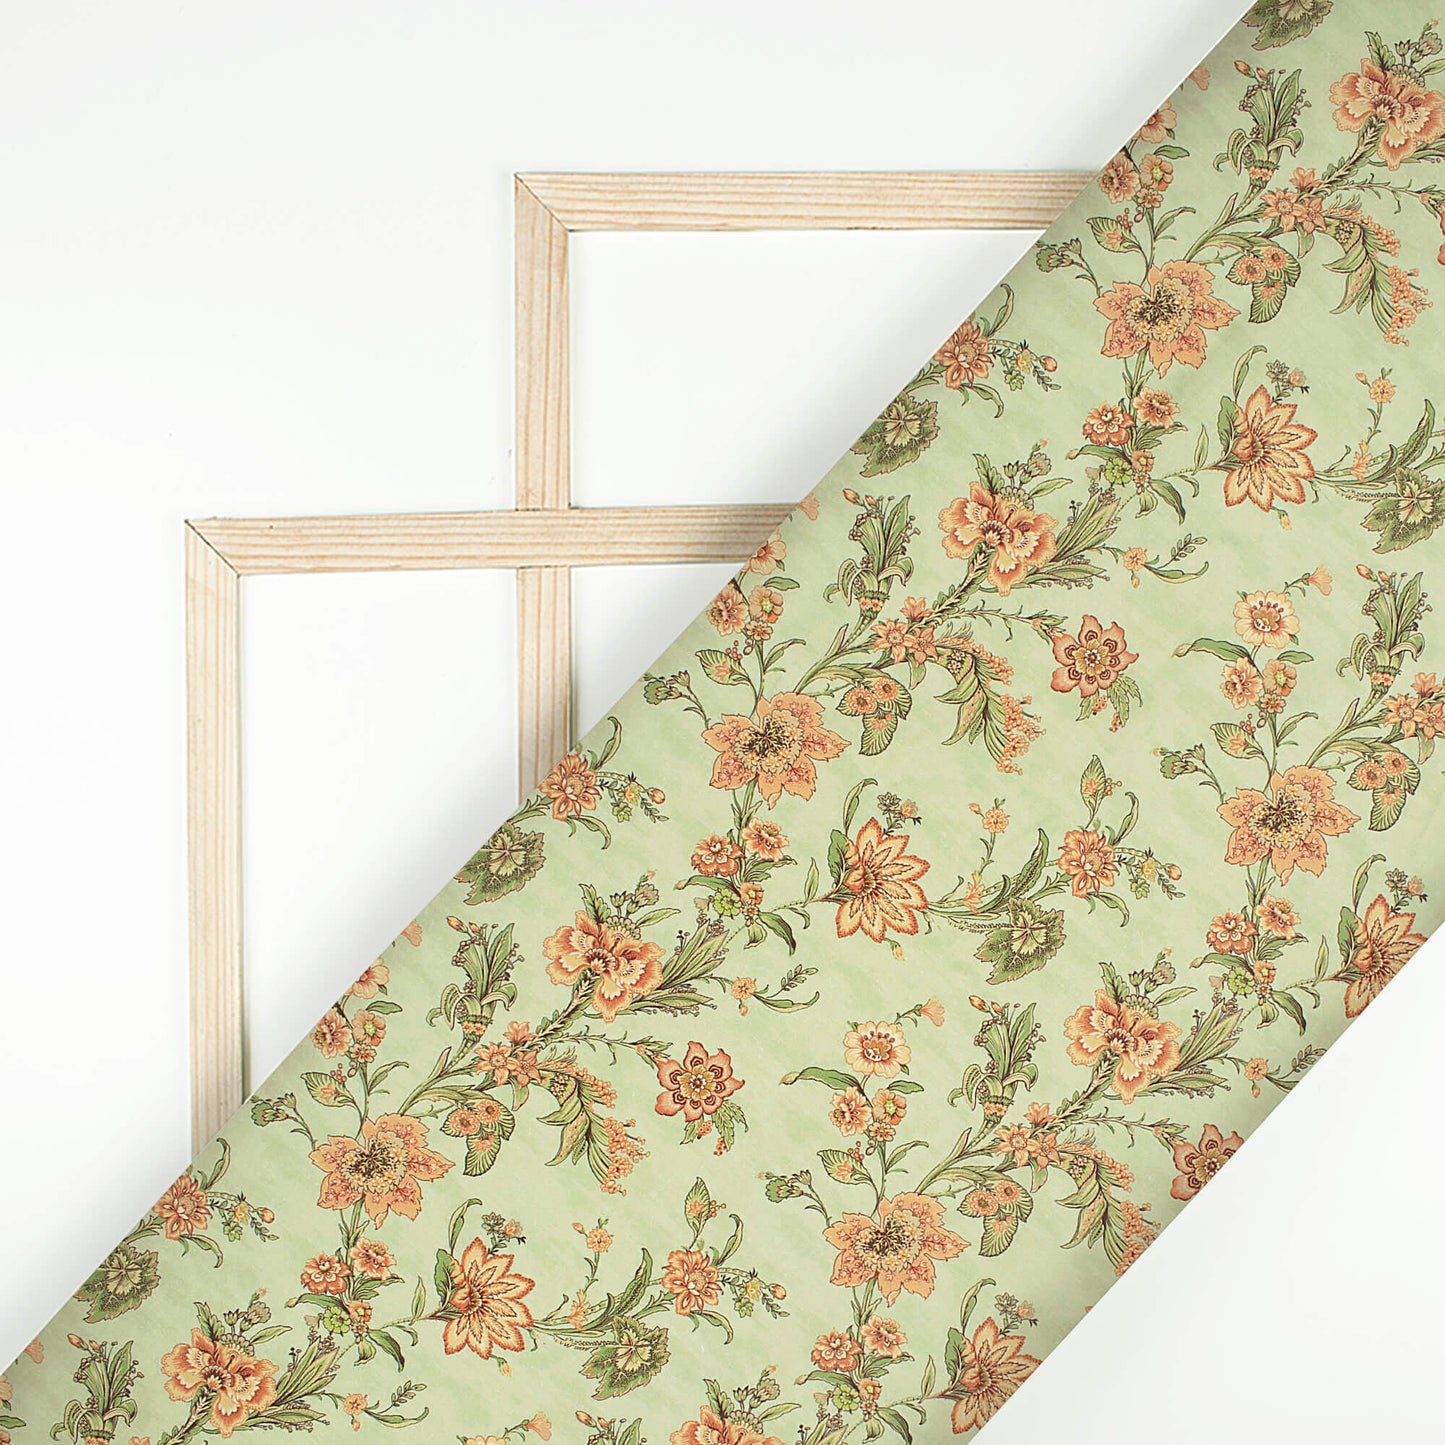 Pistachio Green And Light Orange Floral Pattern Digital Print Poly Cambric Fabric